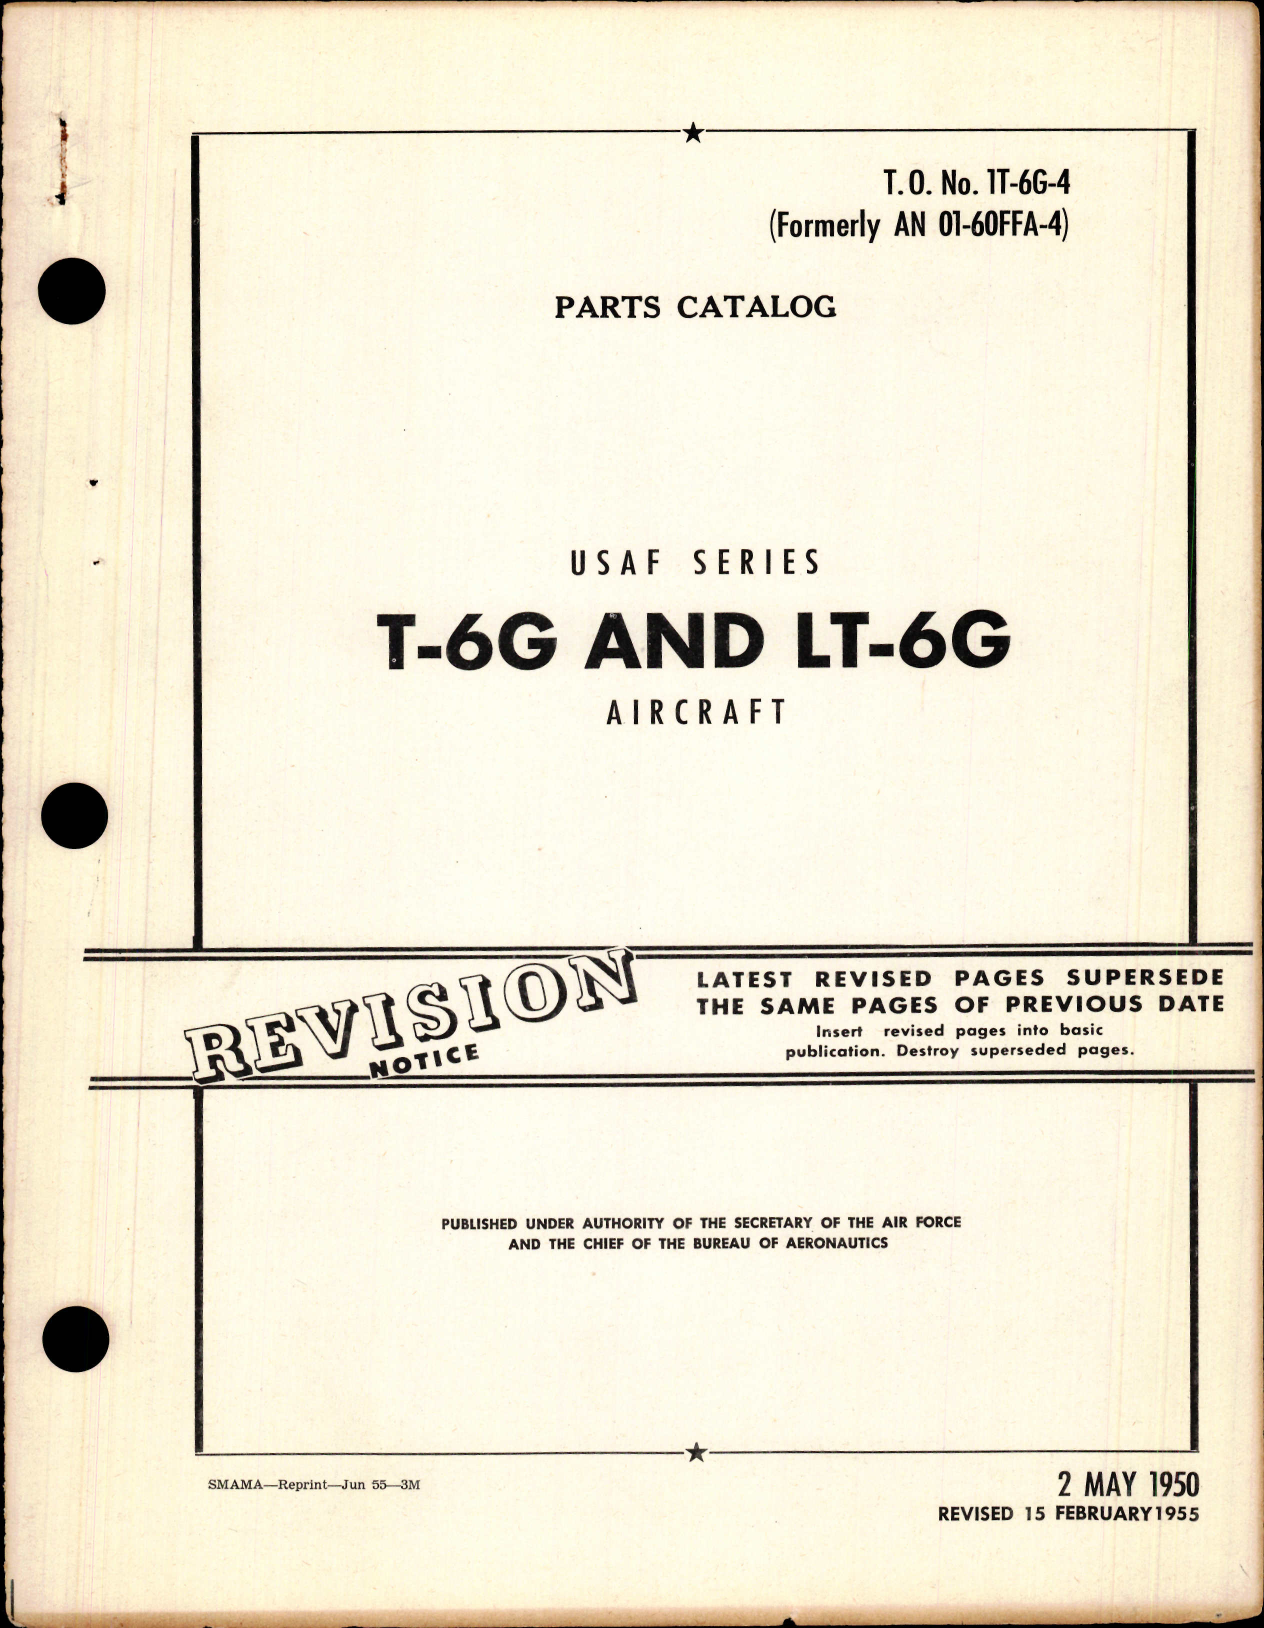 Sample page 1 from AirCorps Library document: Parts Catalog for T-6G and LT-6G